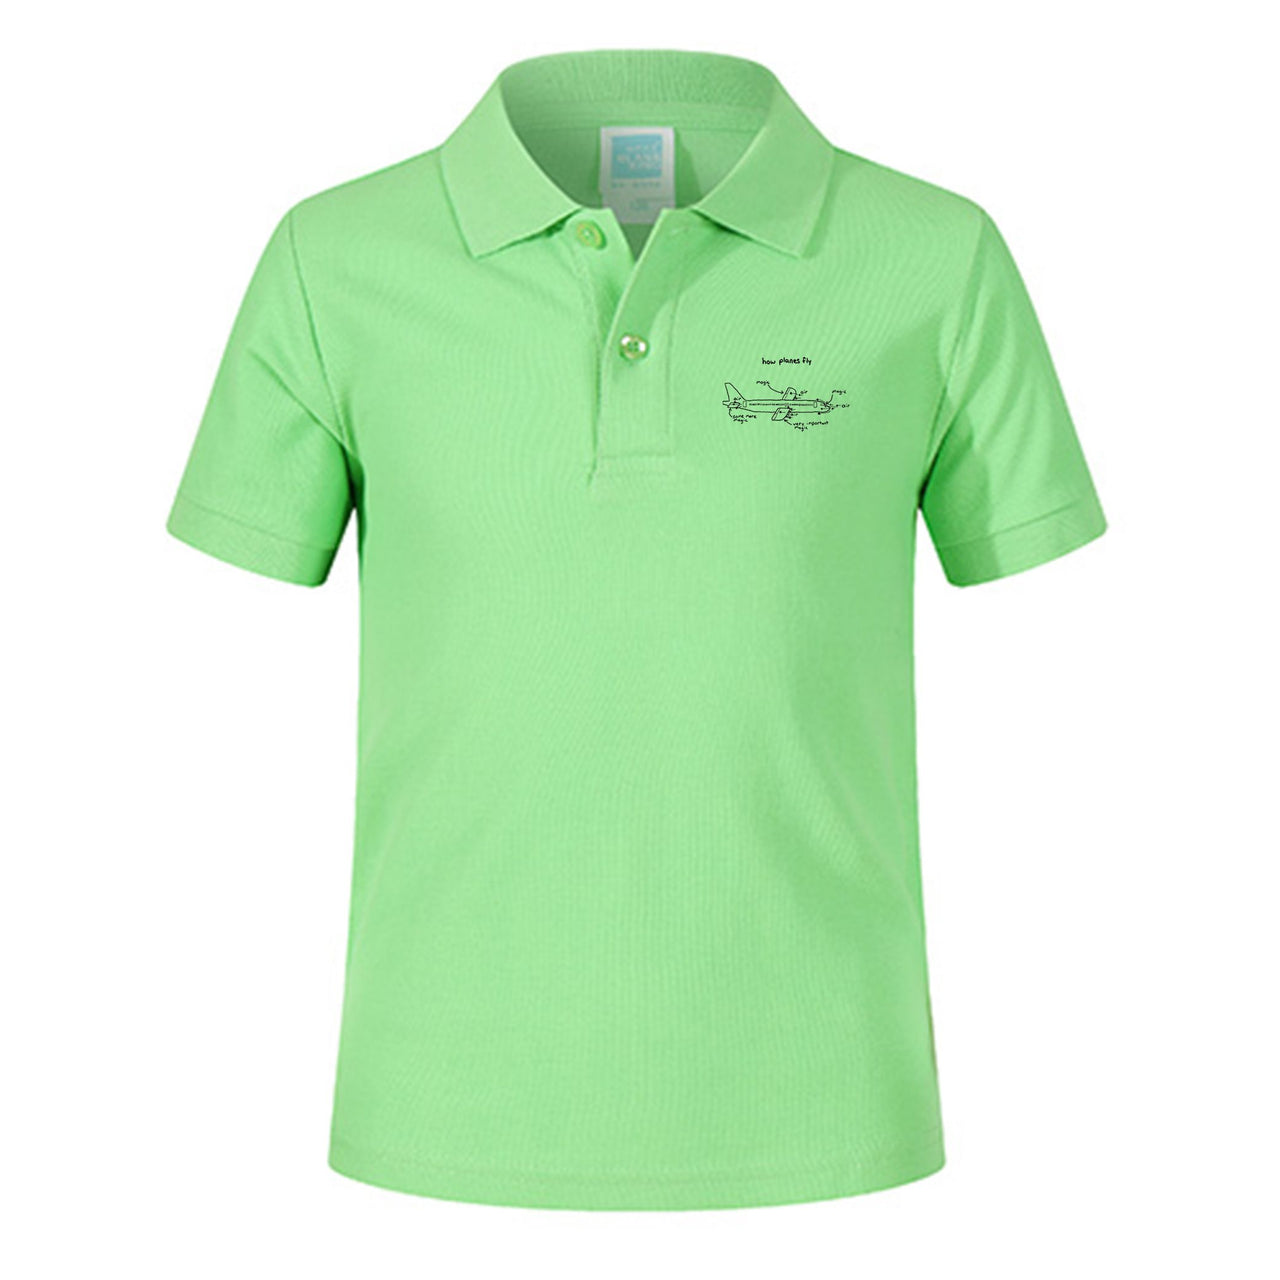 How Planes Fly Designed Children Polo T-Shirts